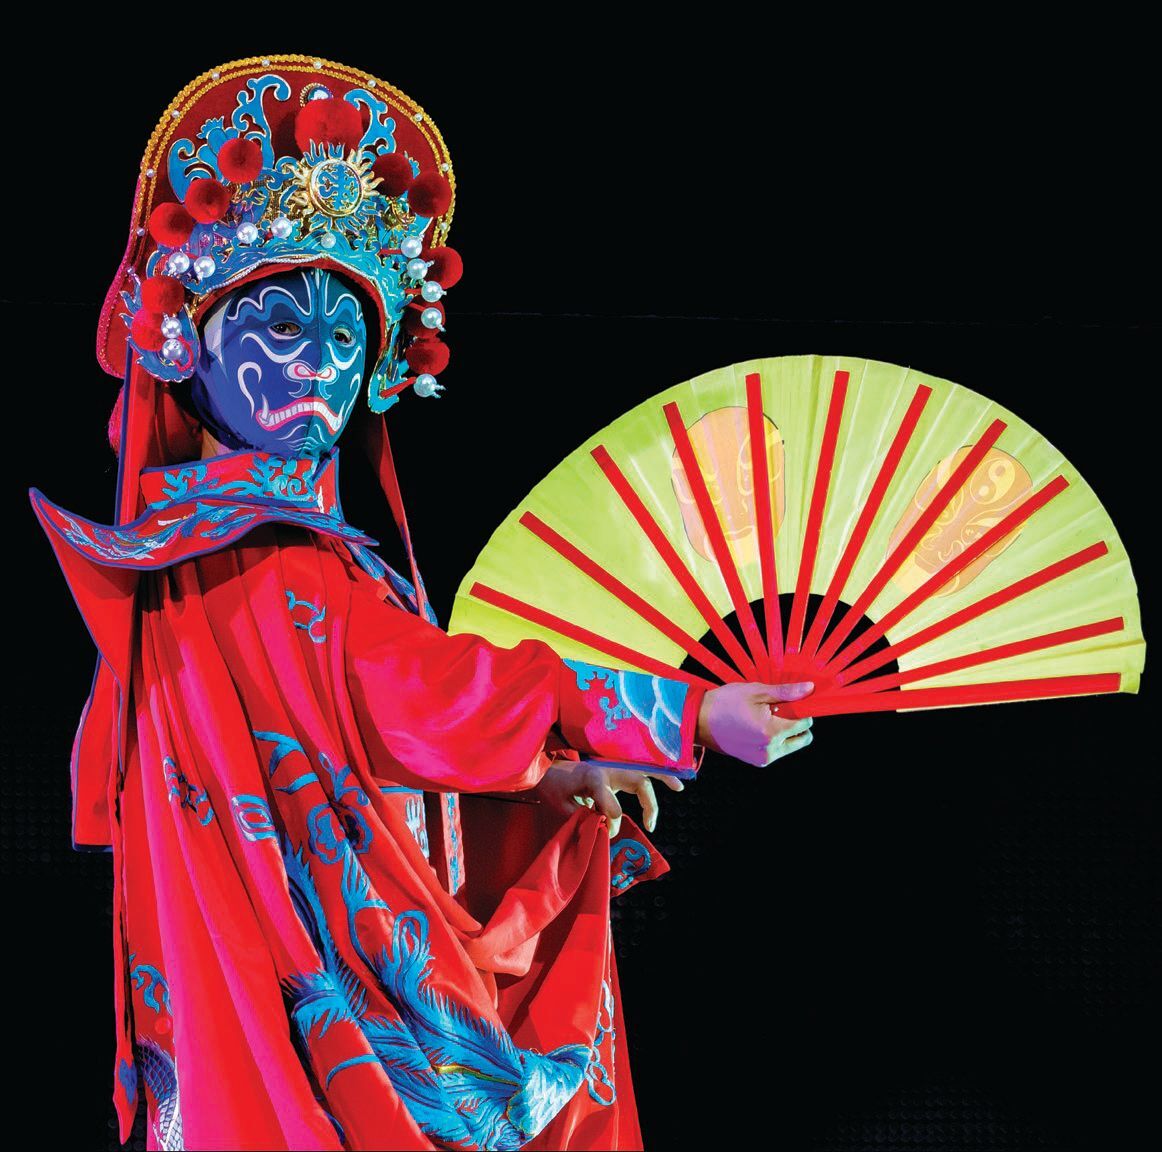 At the festival, experience face-changing, an ancient dramatic art from the Sichuan opera. PHOTO: BY J FUSCO